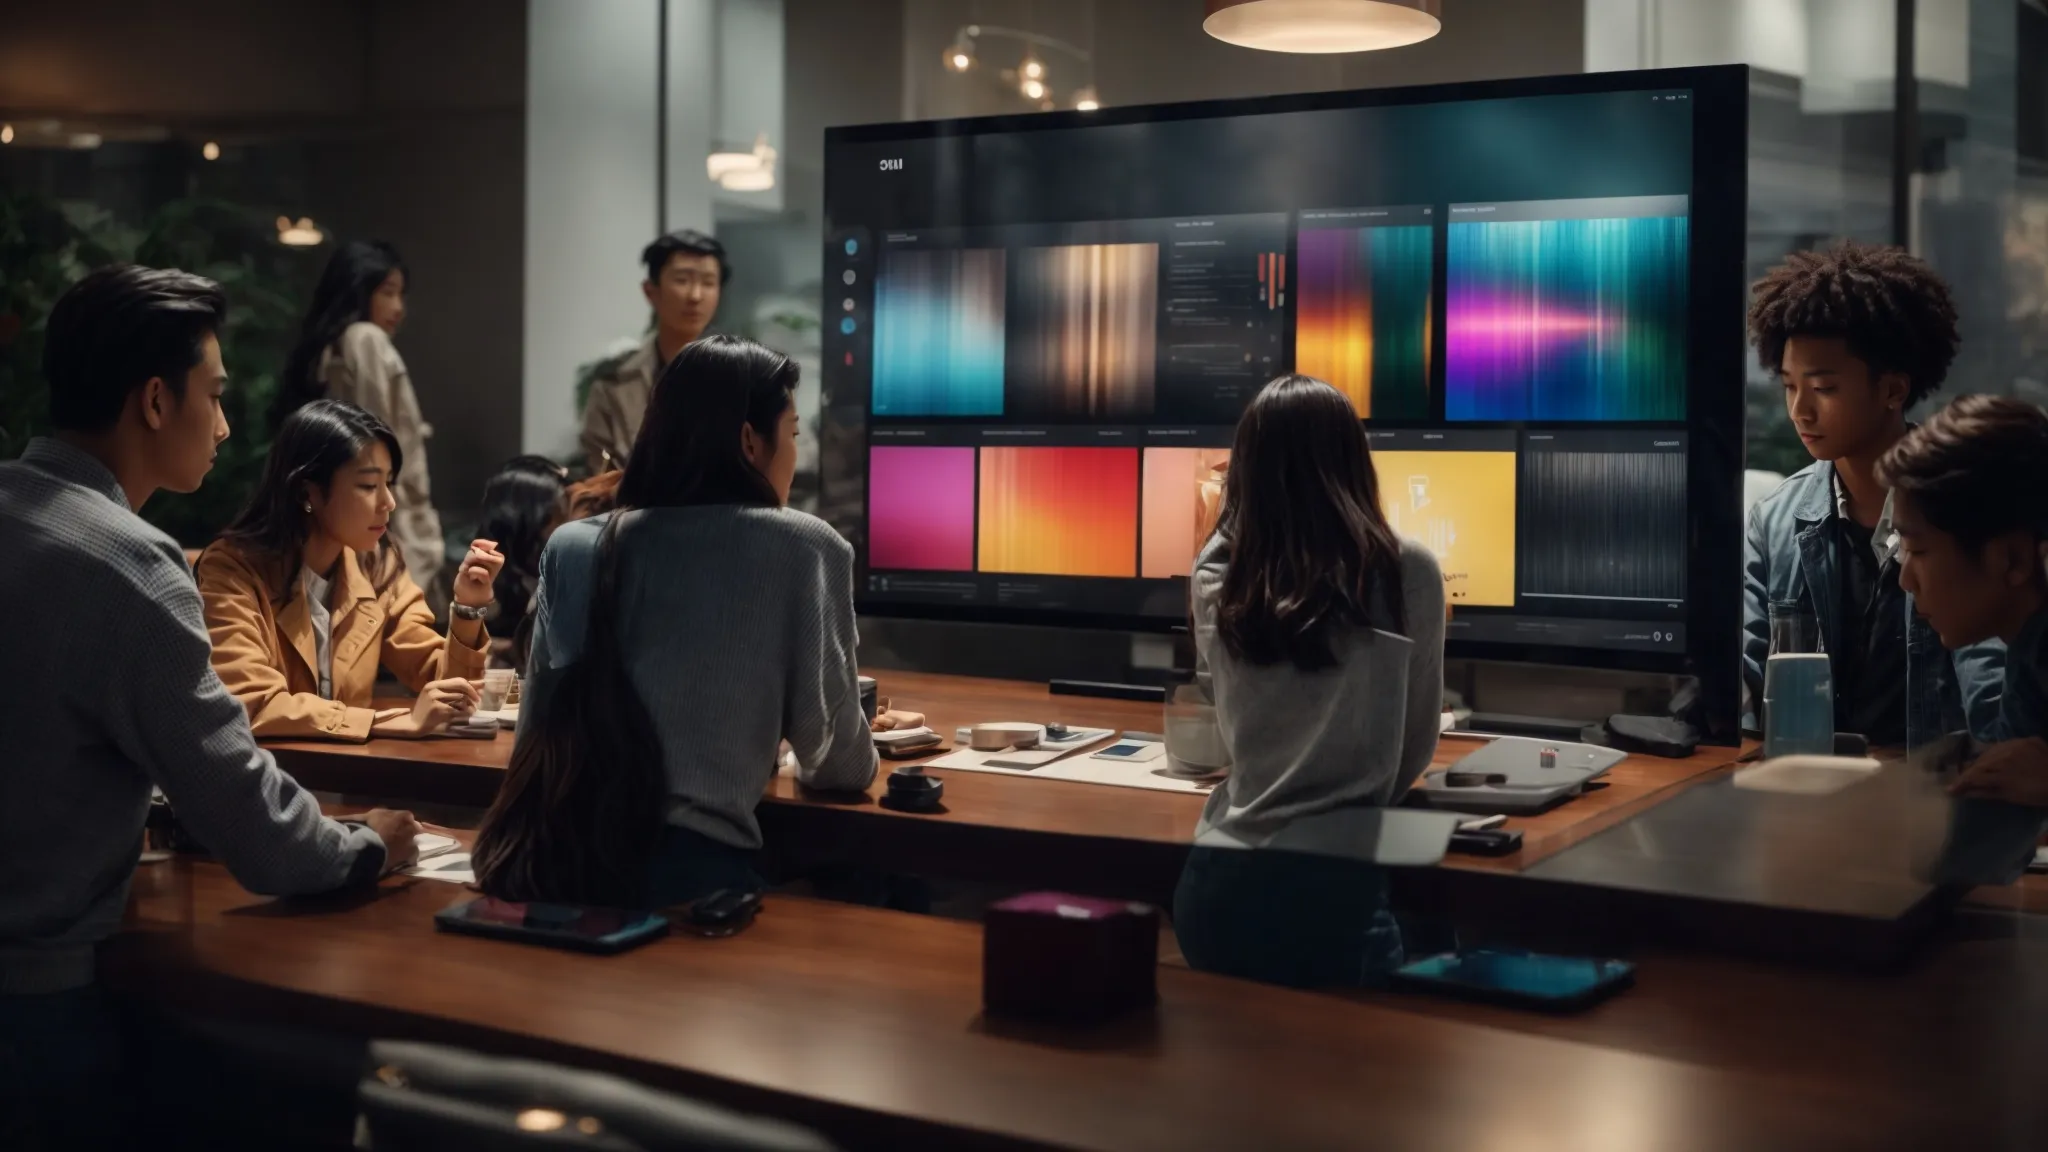 a group of people gathered around a large, sleek table, intently focusing on various screens displaying colorful music streaming apps and information.